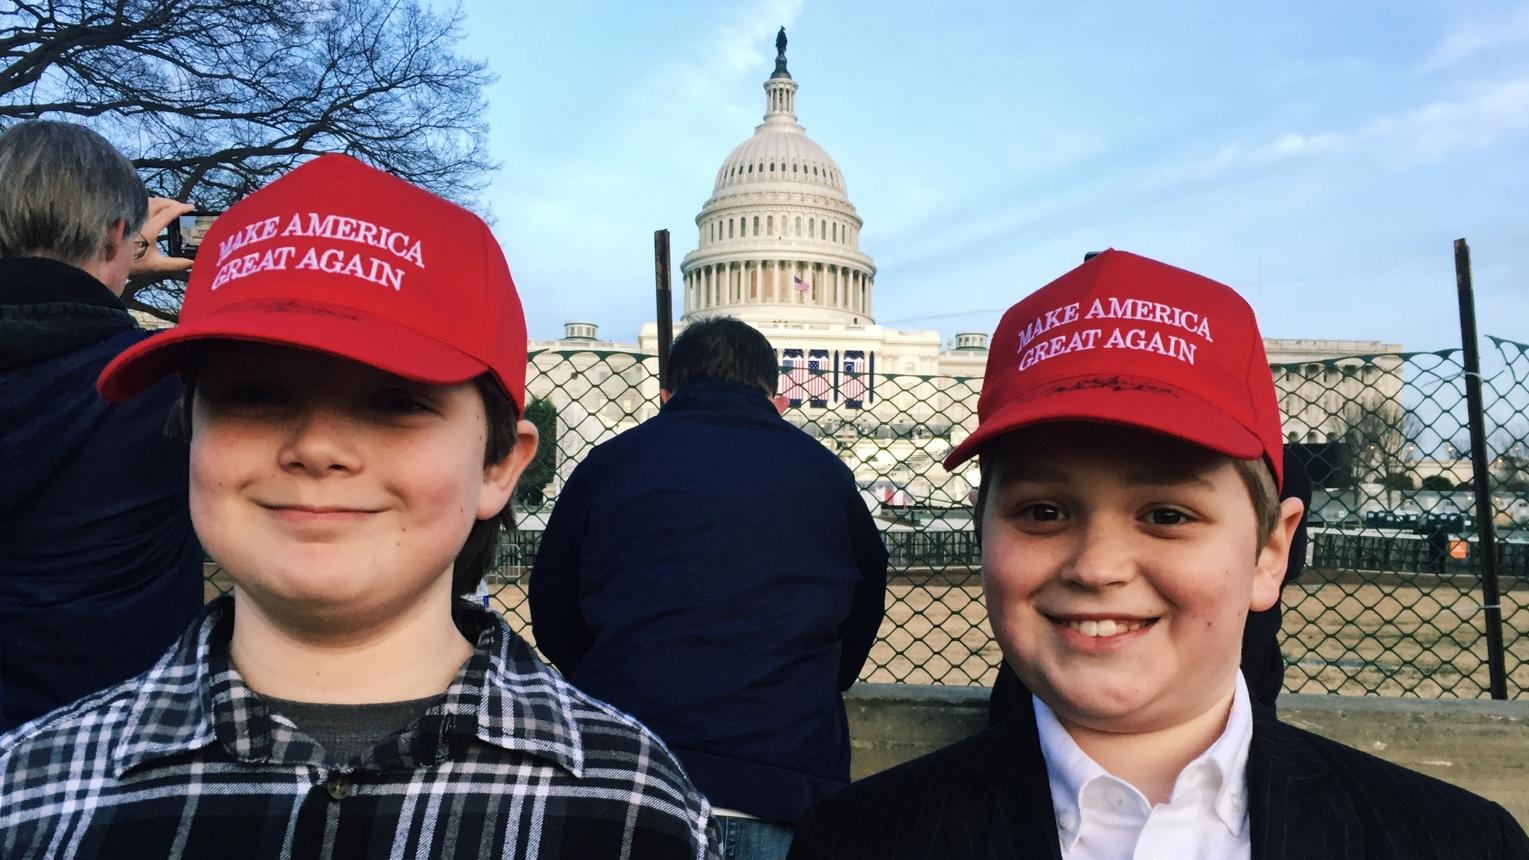 For Christmas, Gavin Miller (right) asked his mom to take him to the presidential inauguration. Here, he stands in front of the US Capitol with the friend he brought along.